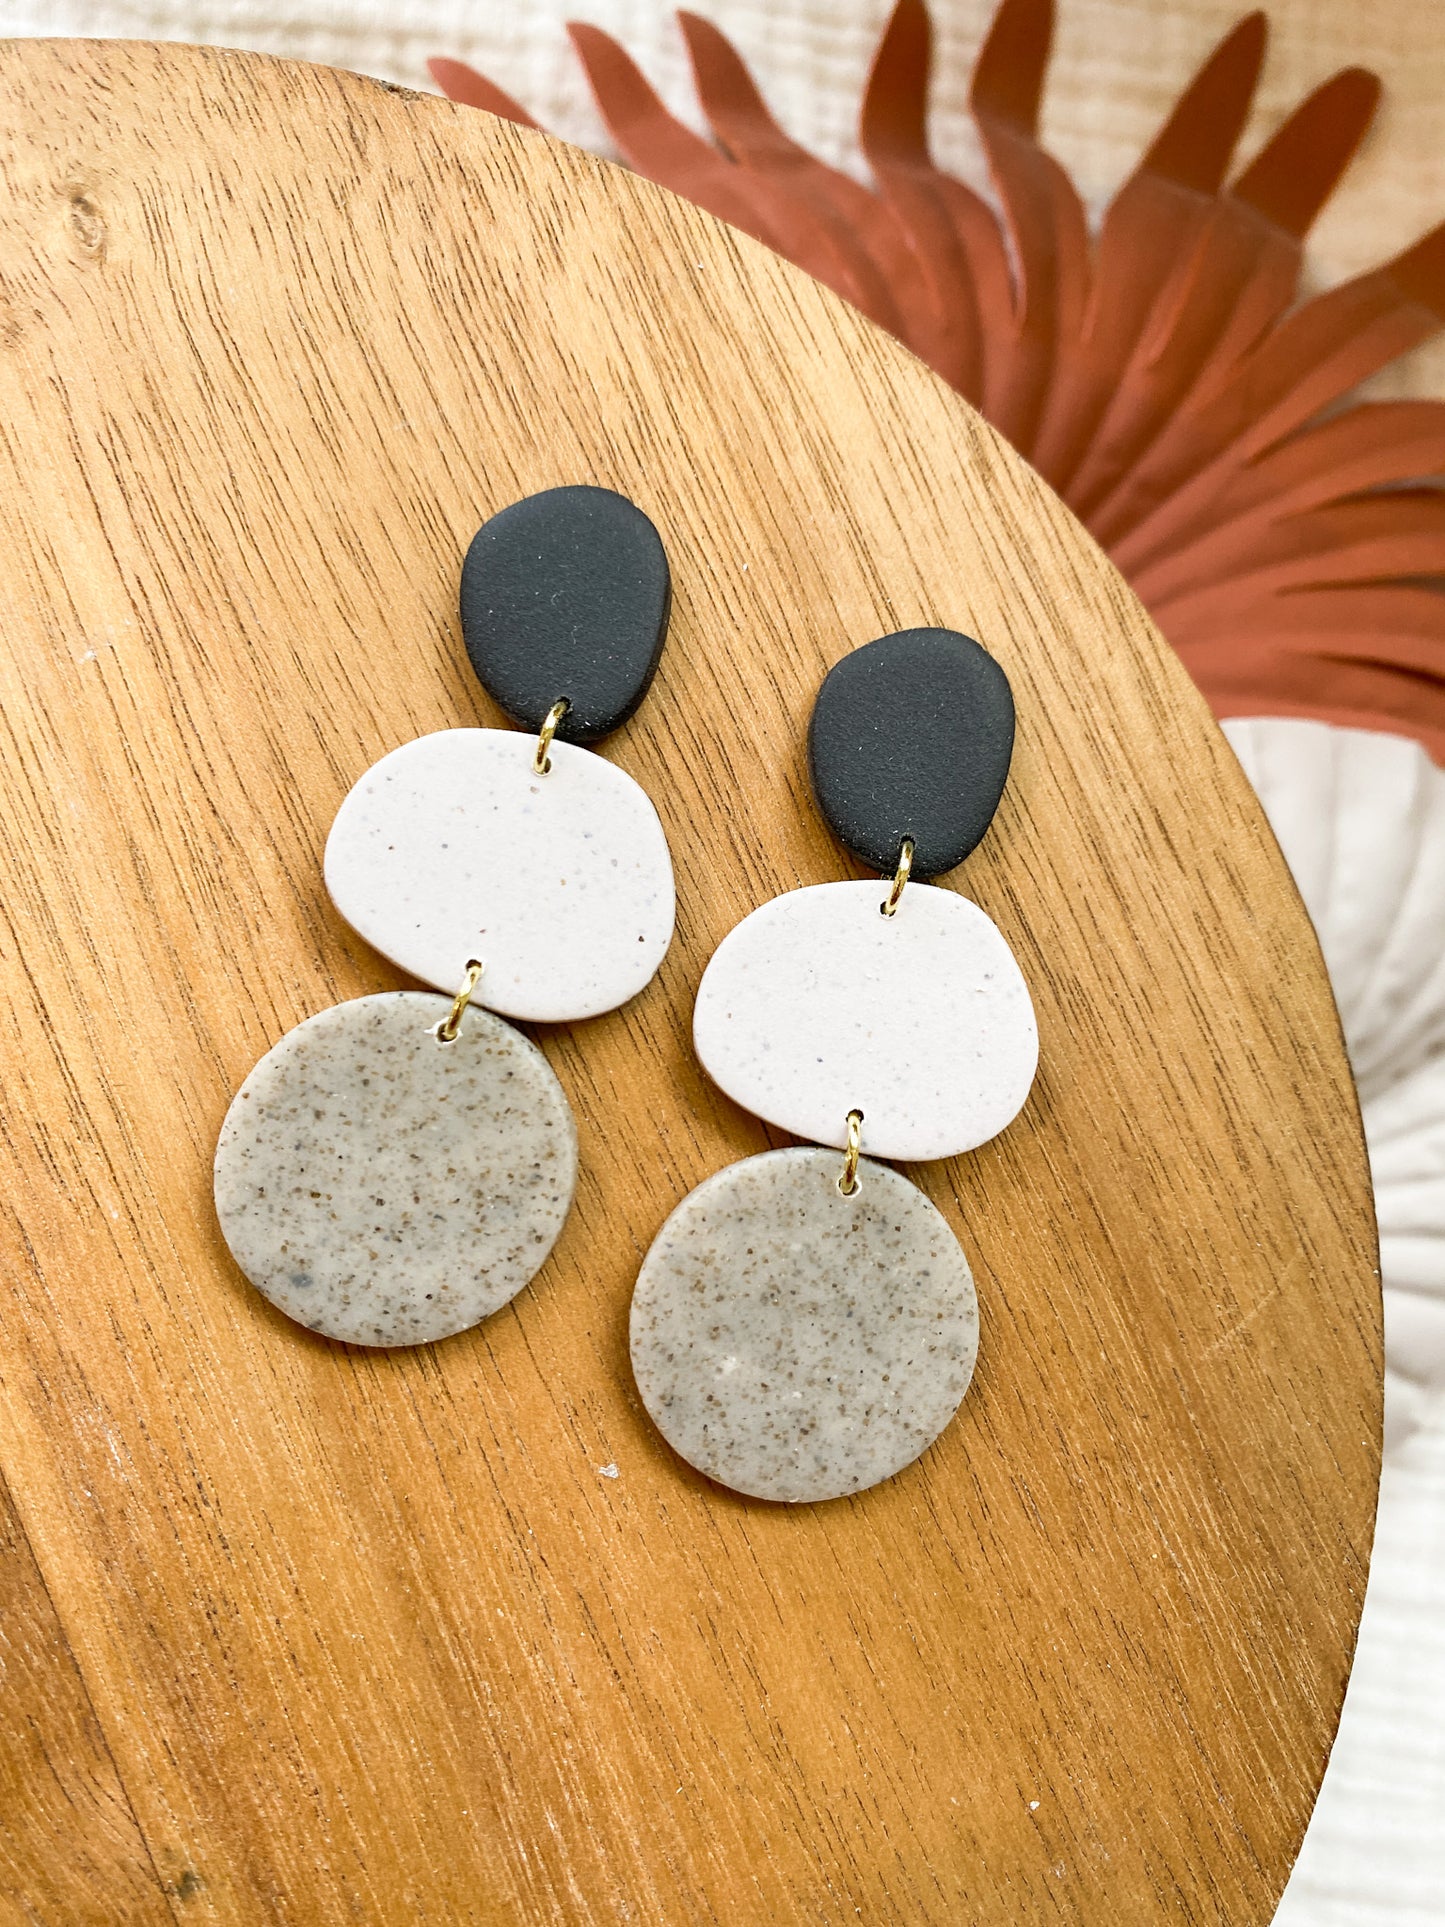 Stone Style Natural Looking Clay Earrings | Polymer Clay | Handmade | Neutral | Dangle | Autumn Earrings | Organic Shape